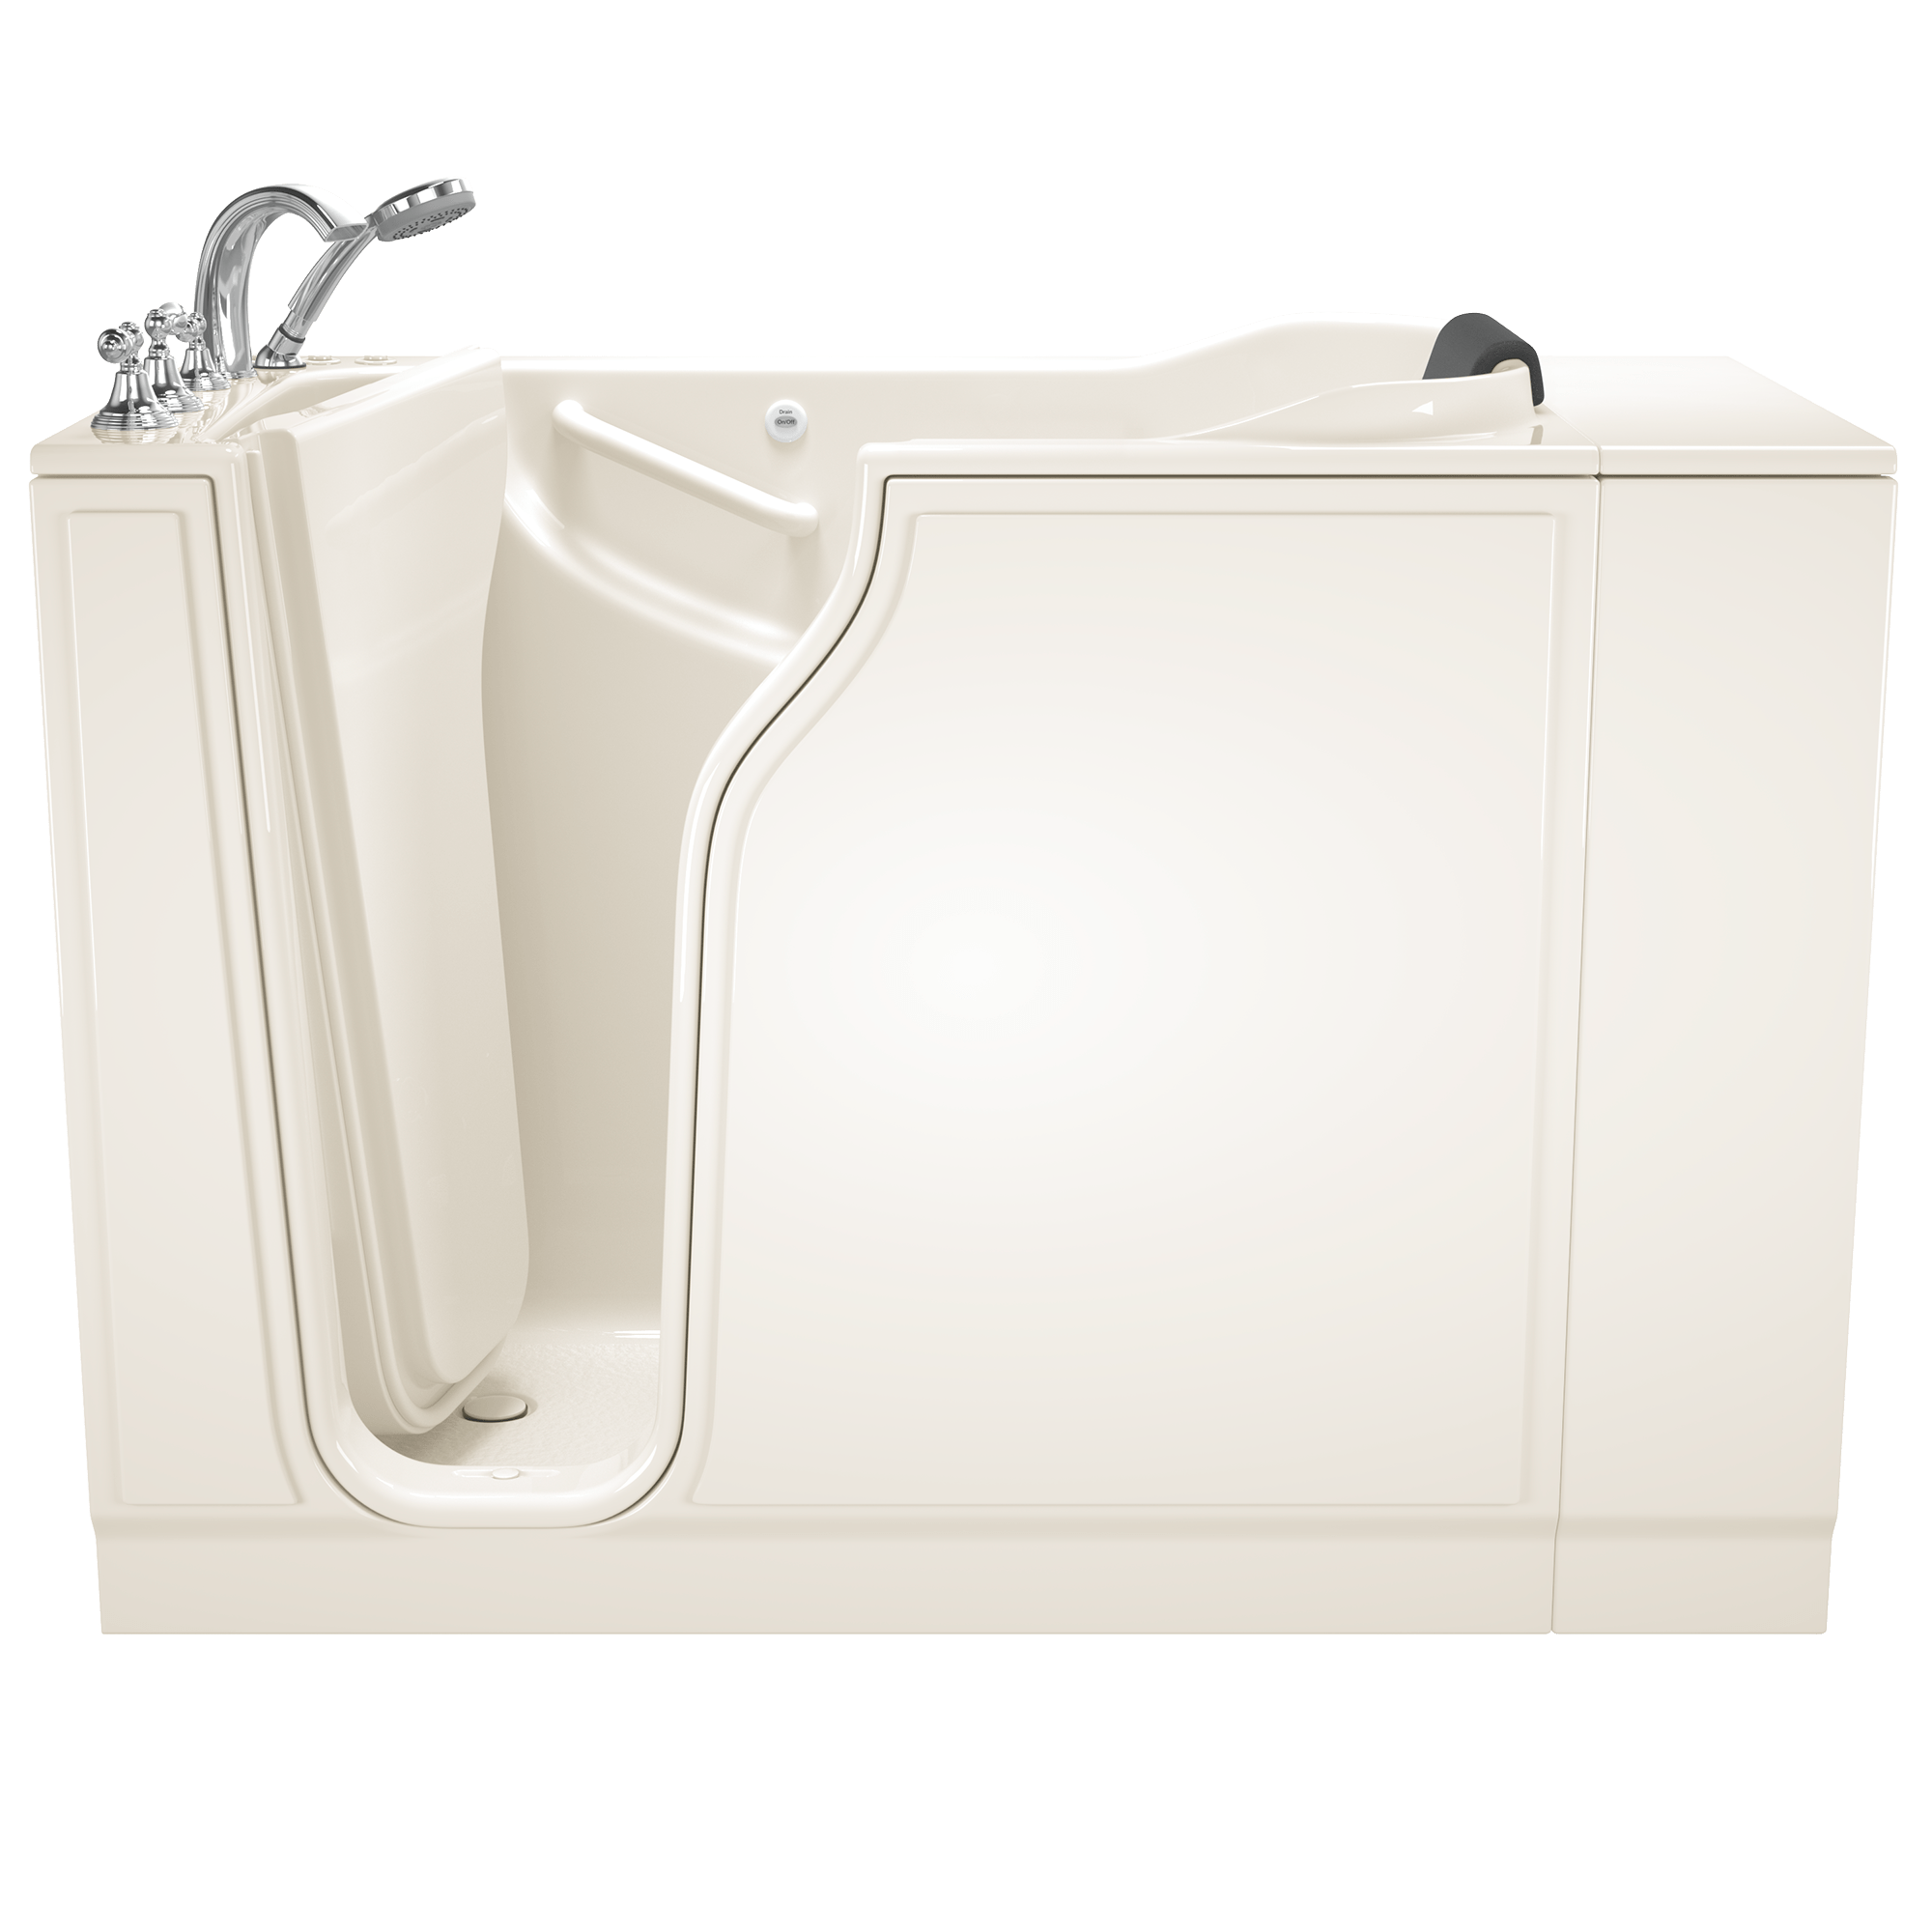 Gelcoat Premium Series 30 x 52 -Inch Walk-in Tub With Combination Air Spa and Whirlpool Systems - Left-Hand Drain With Faucet